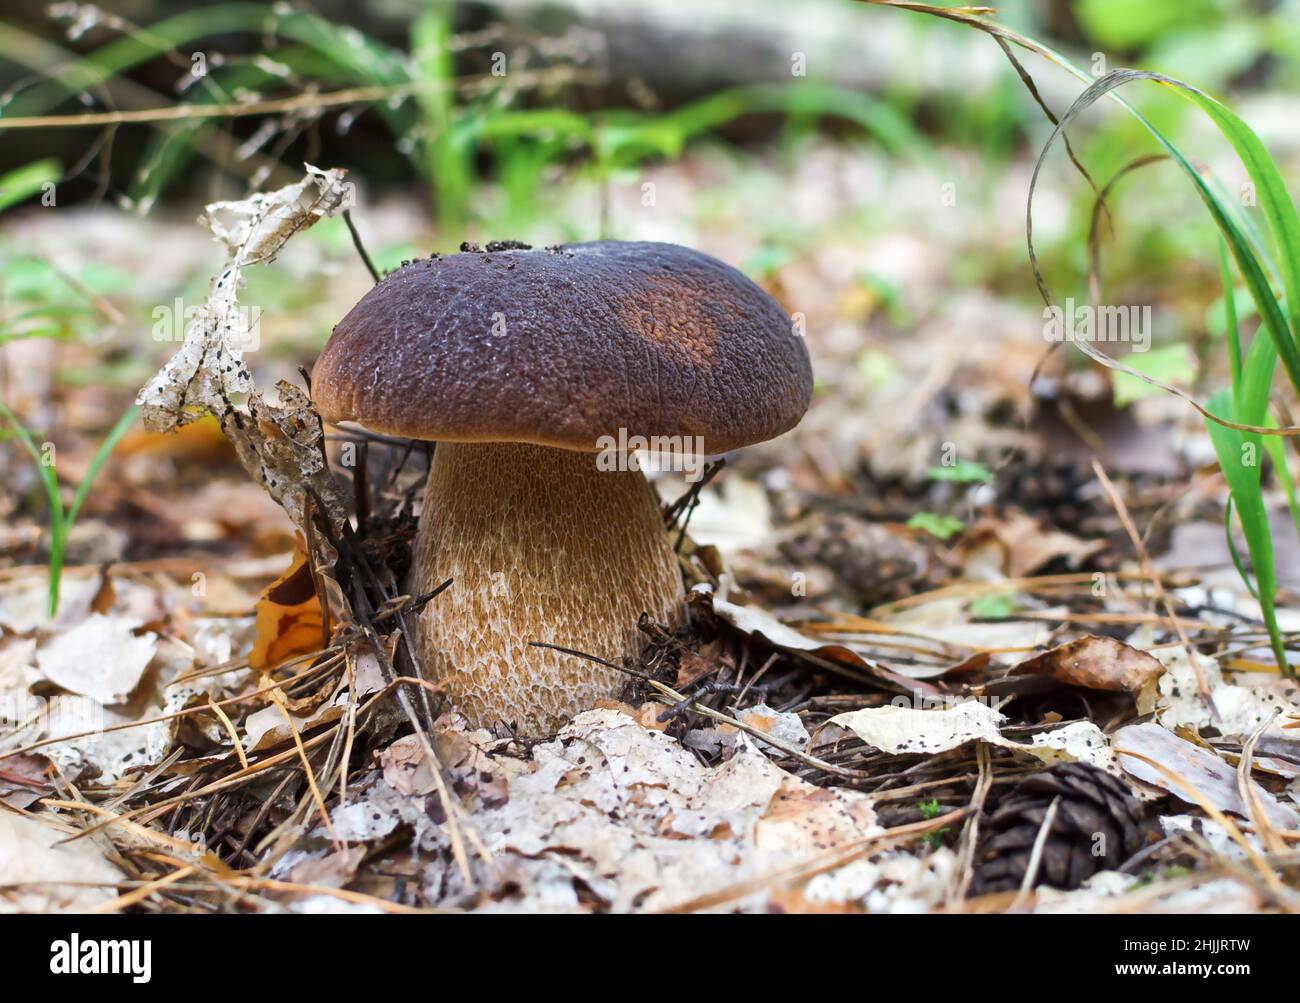 mushroom with brown hat, white edible mushroom grows in the forest on a warm day close-up Stock Photo